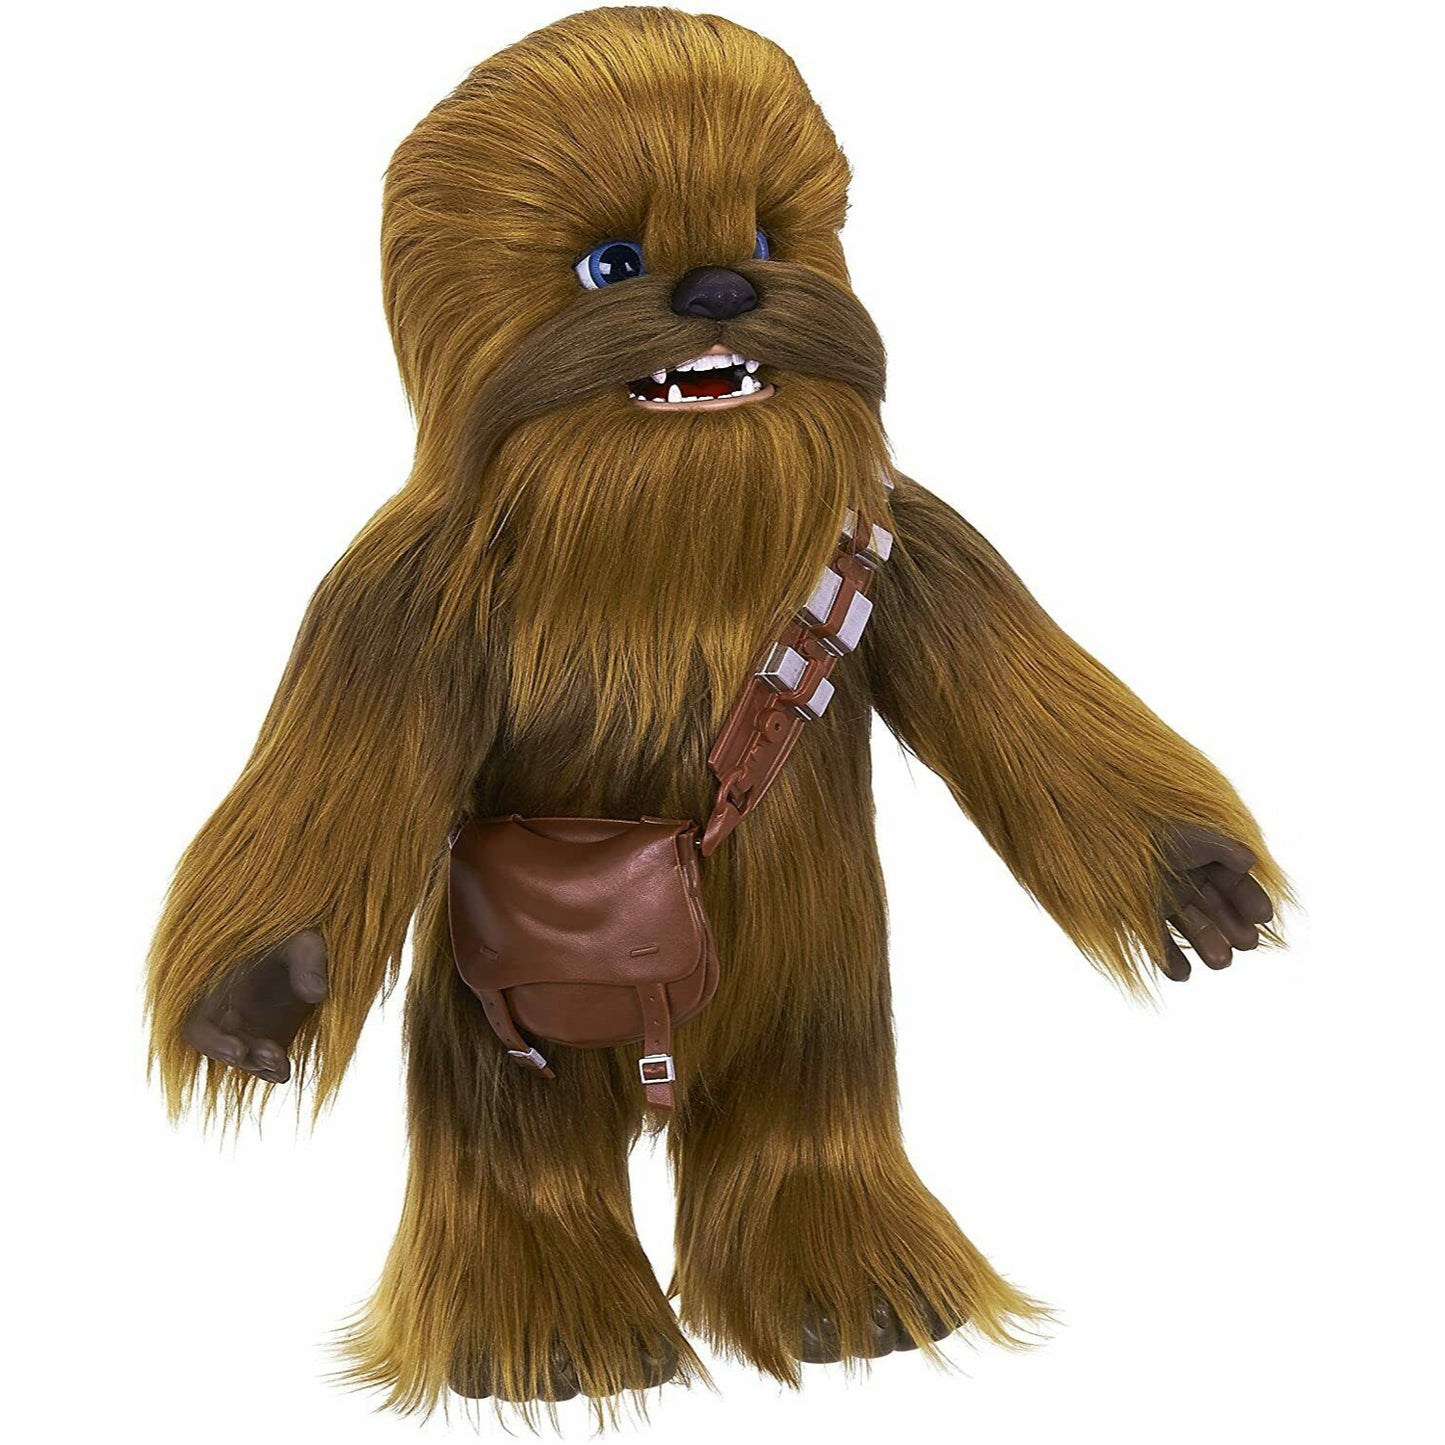 Star Wars Galactic Heroes Ultimate Co-pilot Chewie by Star Wars - UKBuyZone